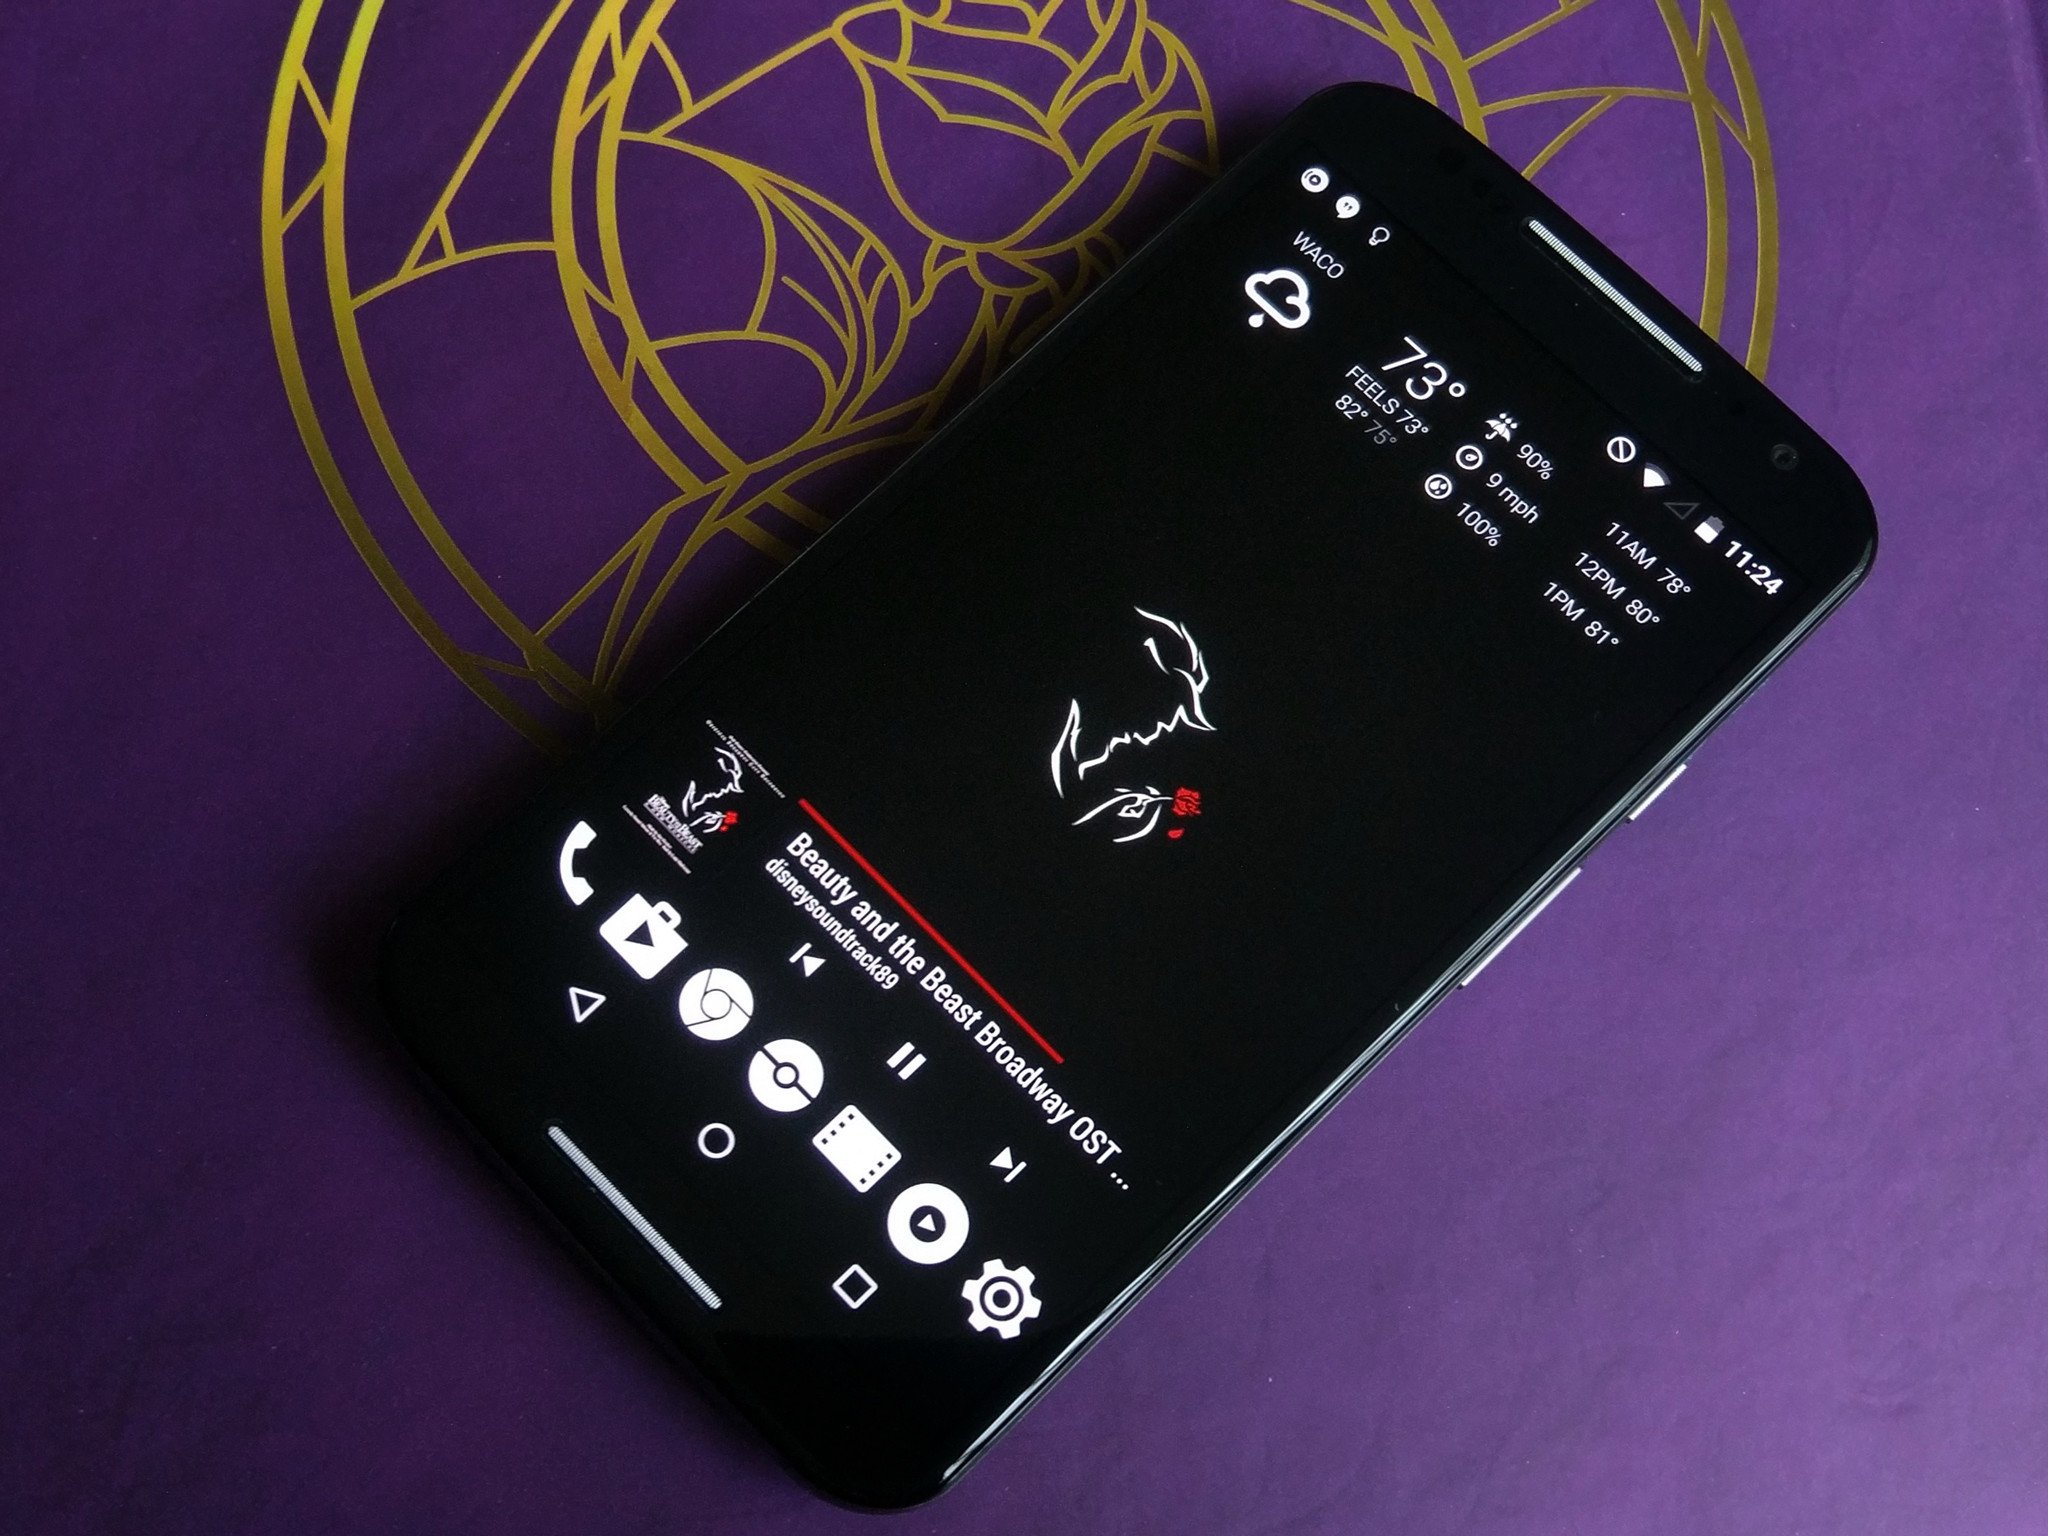 Join The Dark Side With These Awesome Amoled Friendly Wallpapers